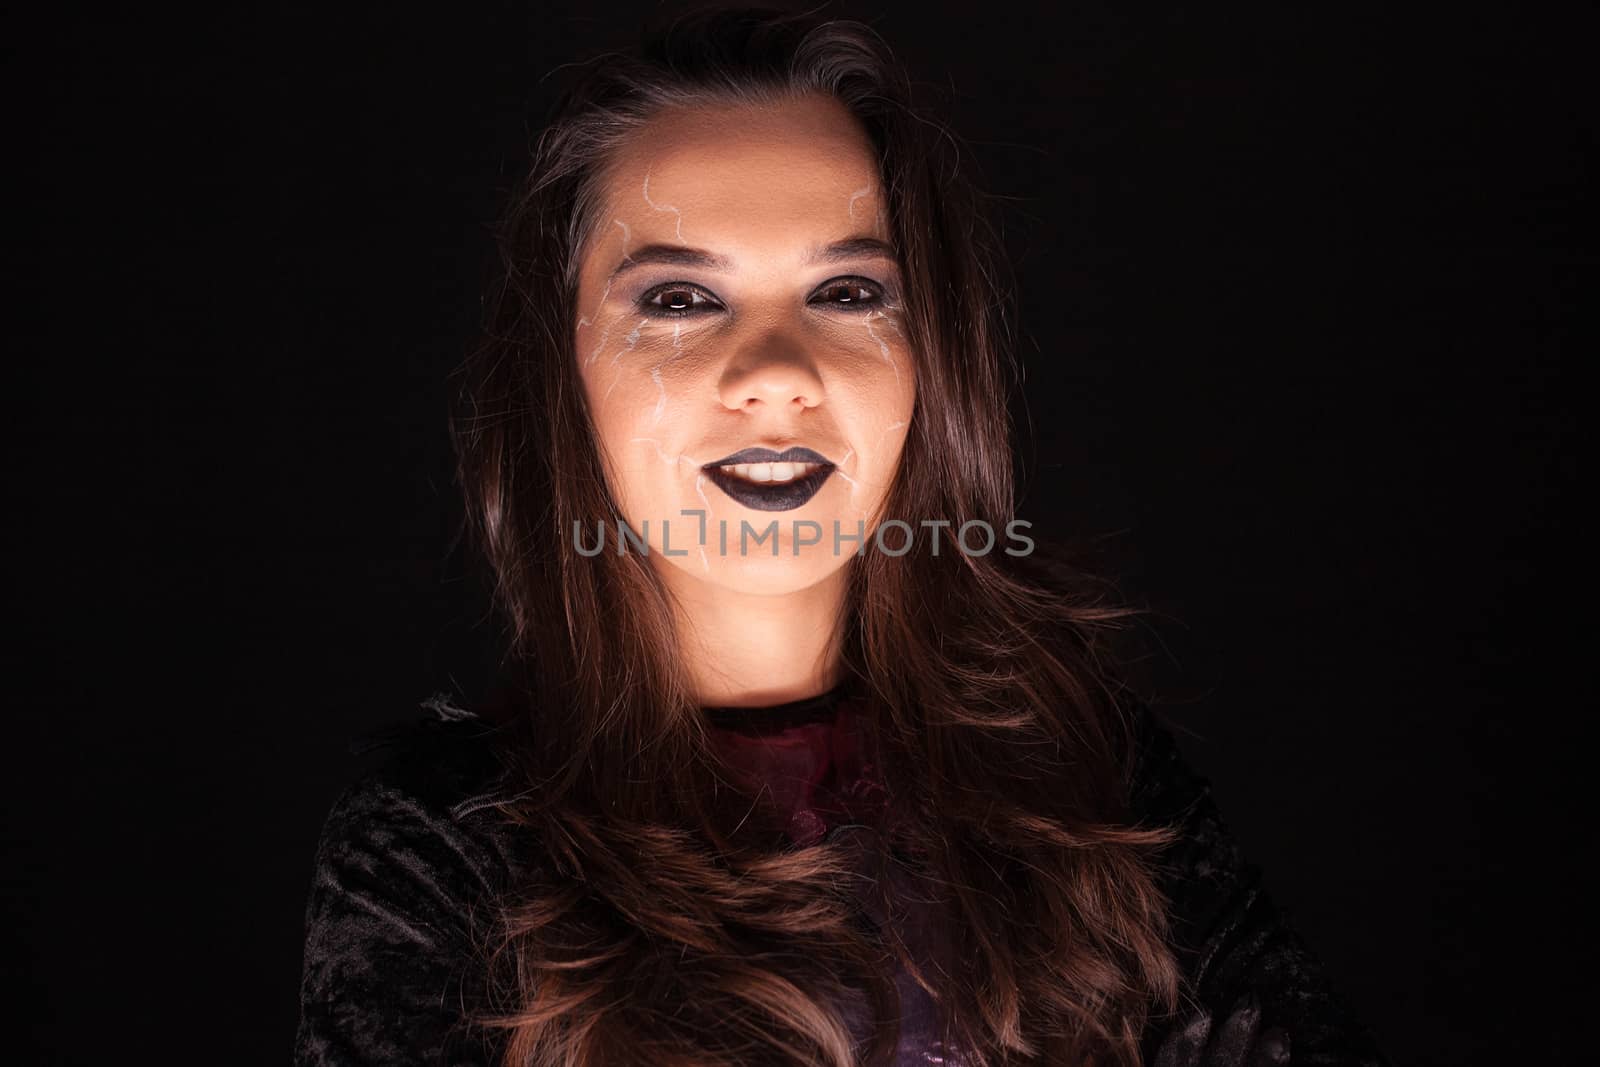 Attractive woman in a witch outfit for halloween looking at the camera over black background.